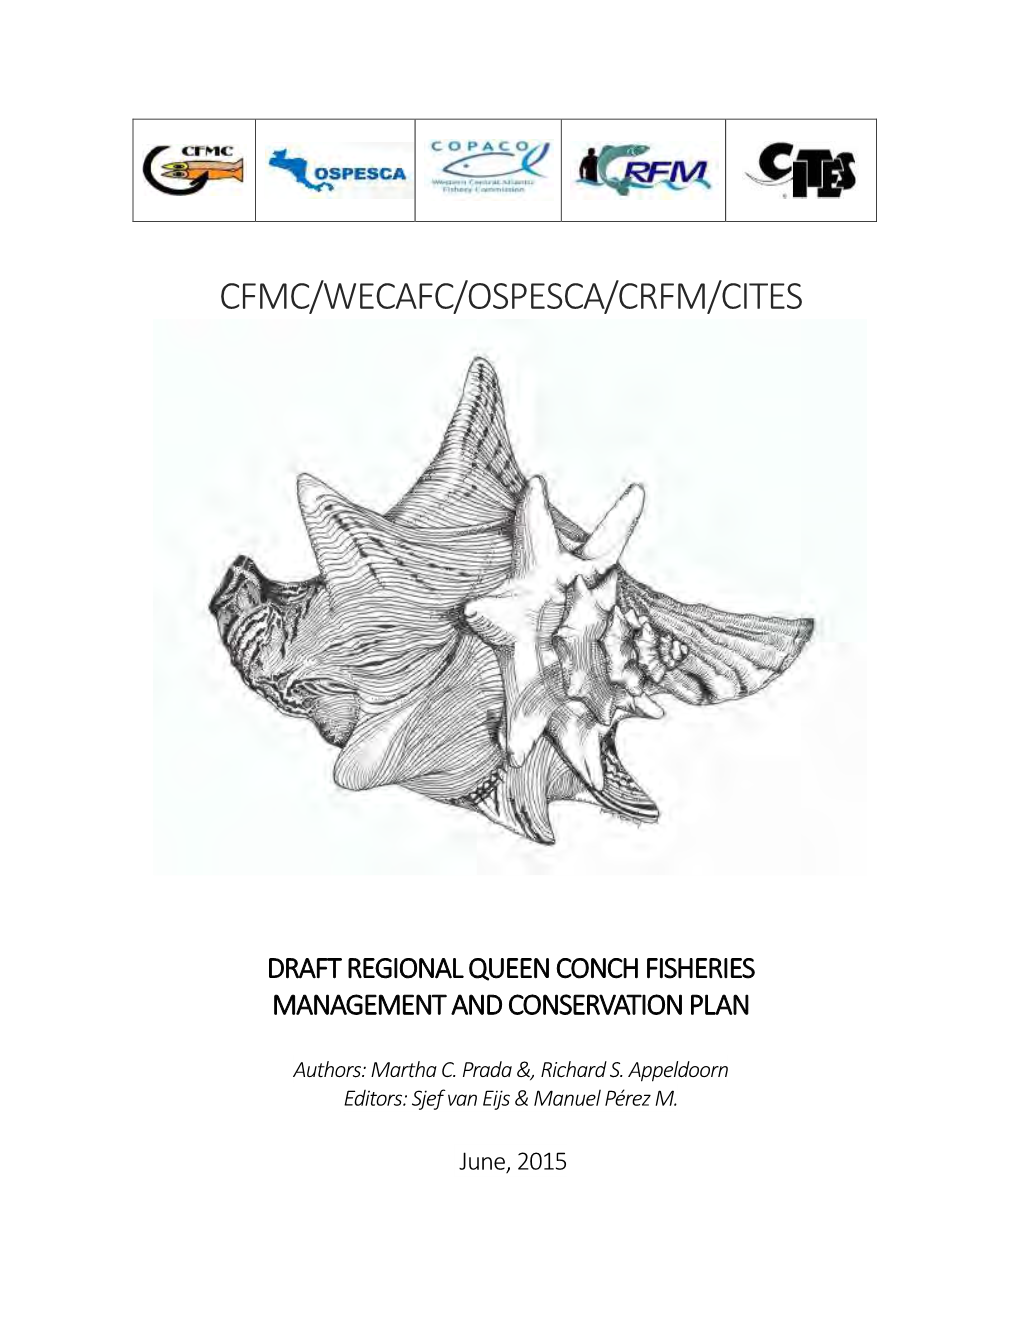 Draft Regional Queen Conch Fisheries Management and Conservation Plan